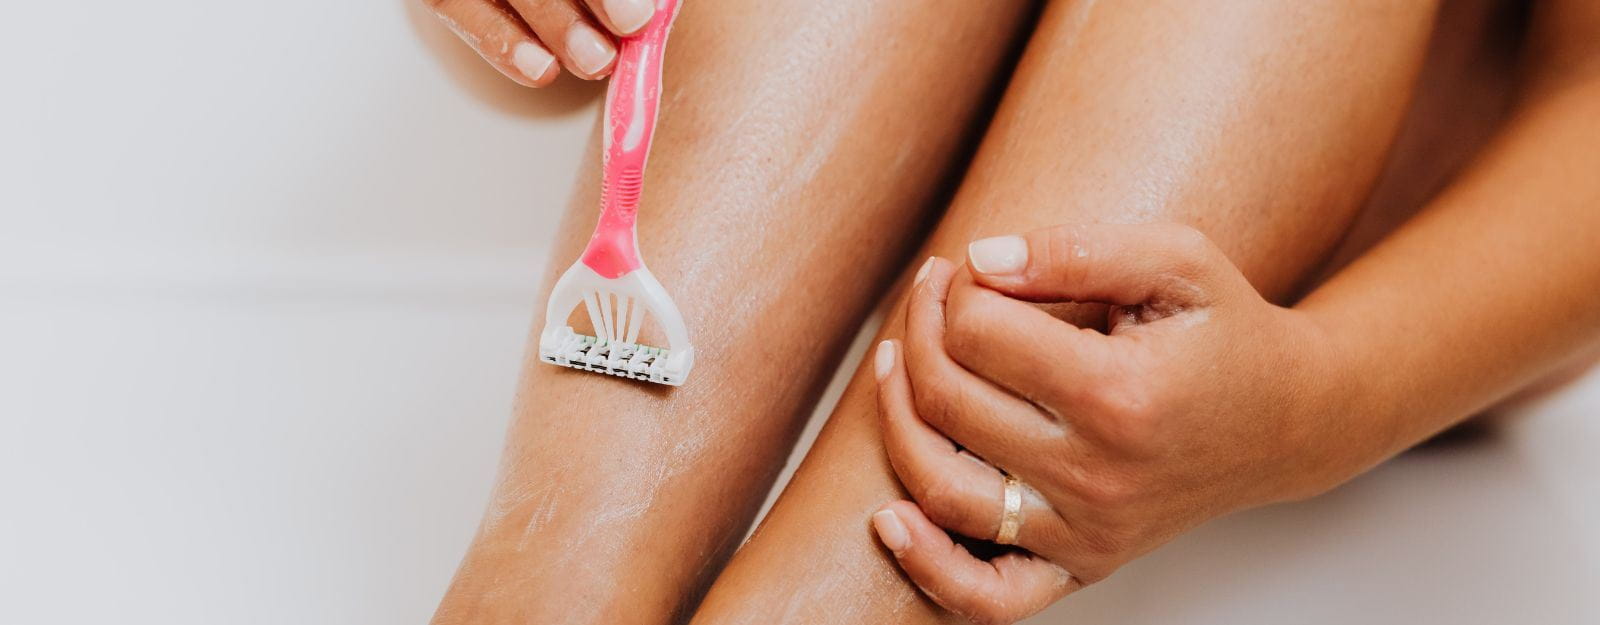 Shaving rash - How to prevent it once and for all